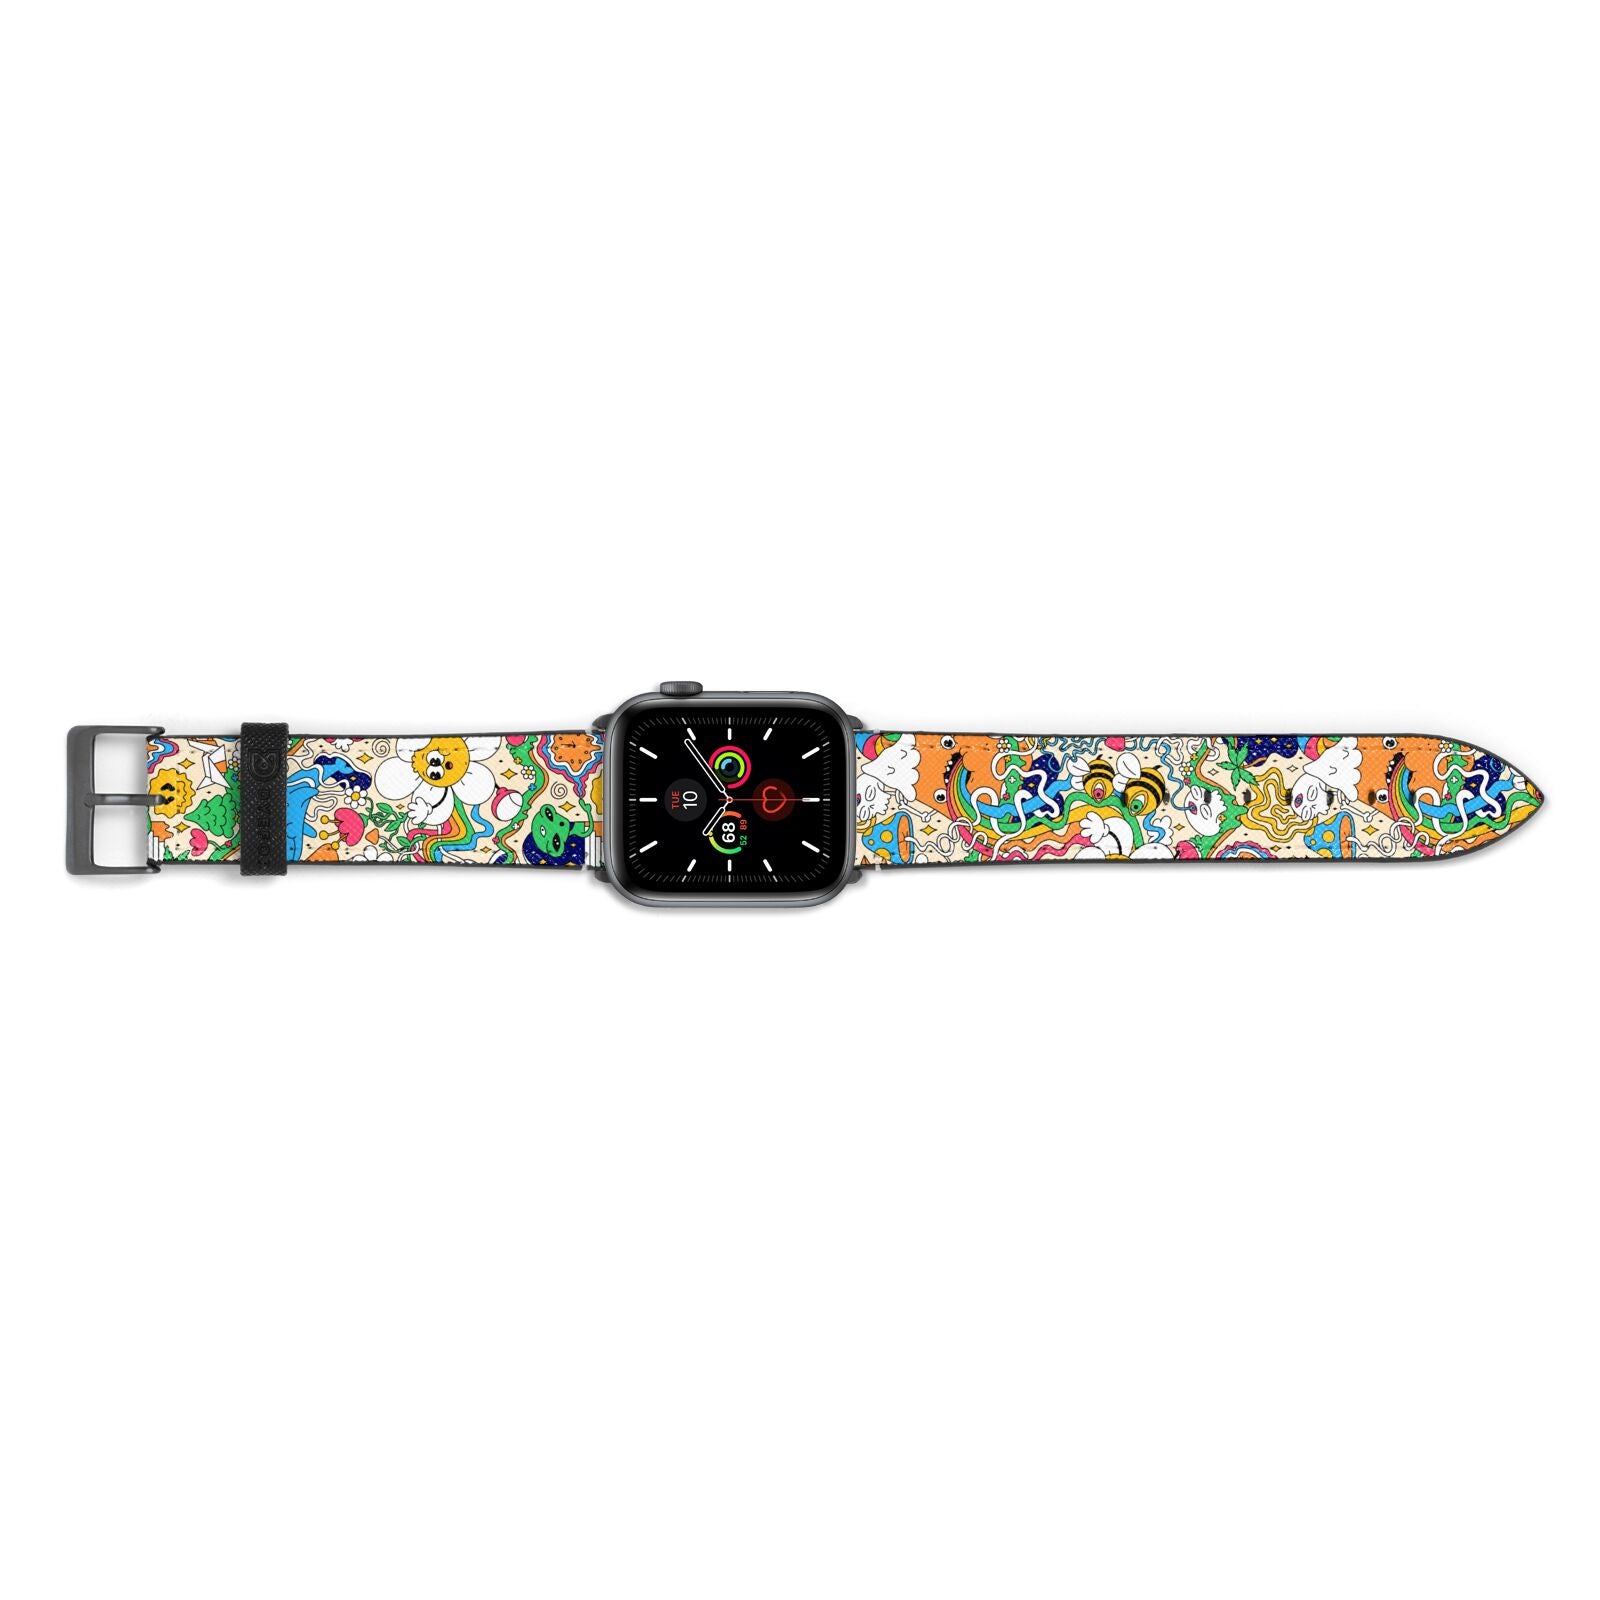 Psychedelic Trippy Apple Watch Strap Landscape Image Space Grey Hardware